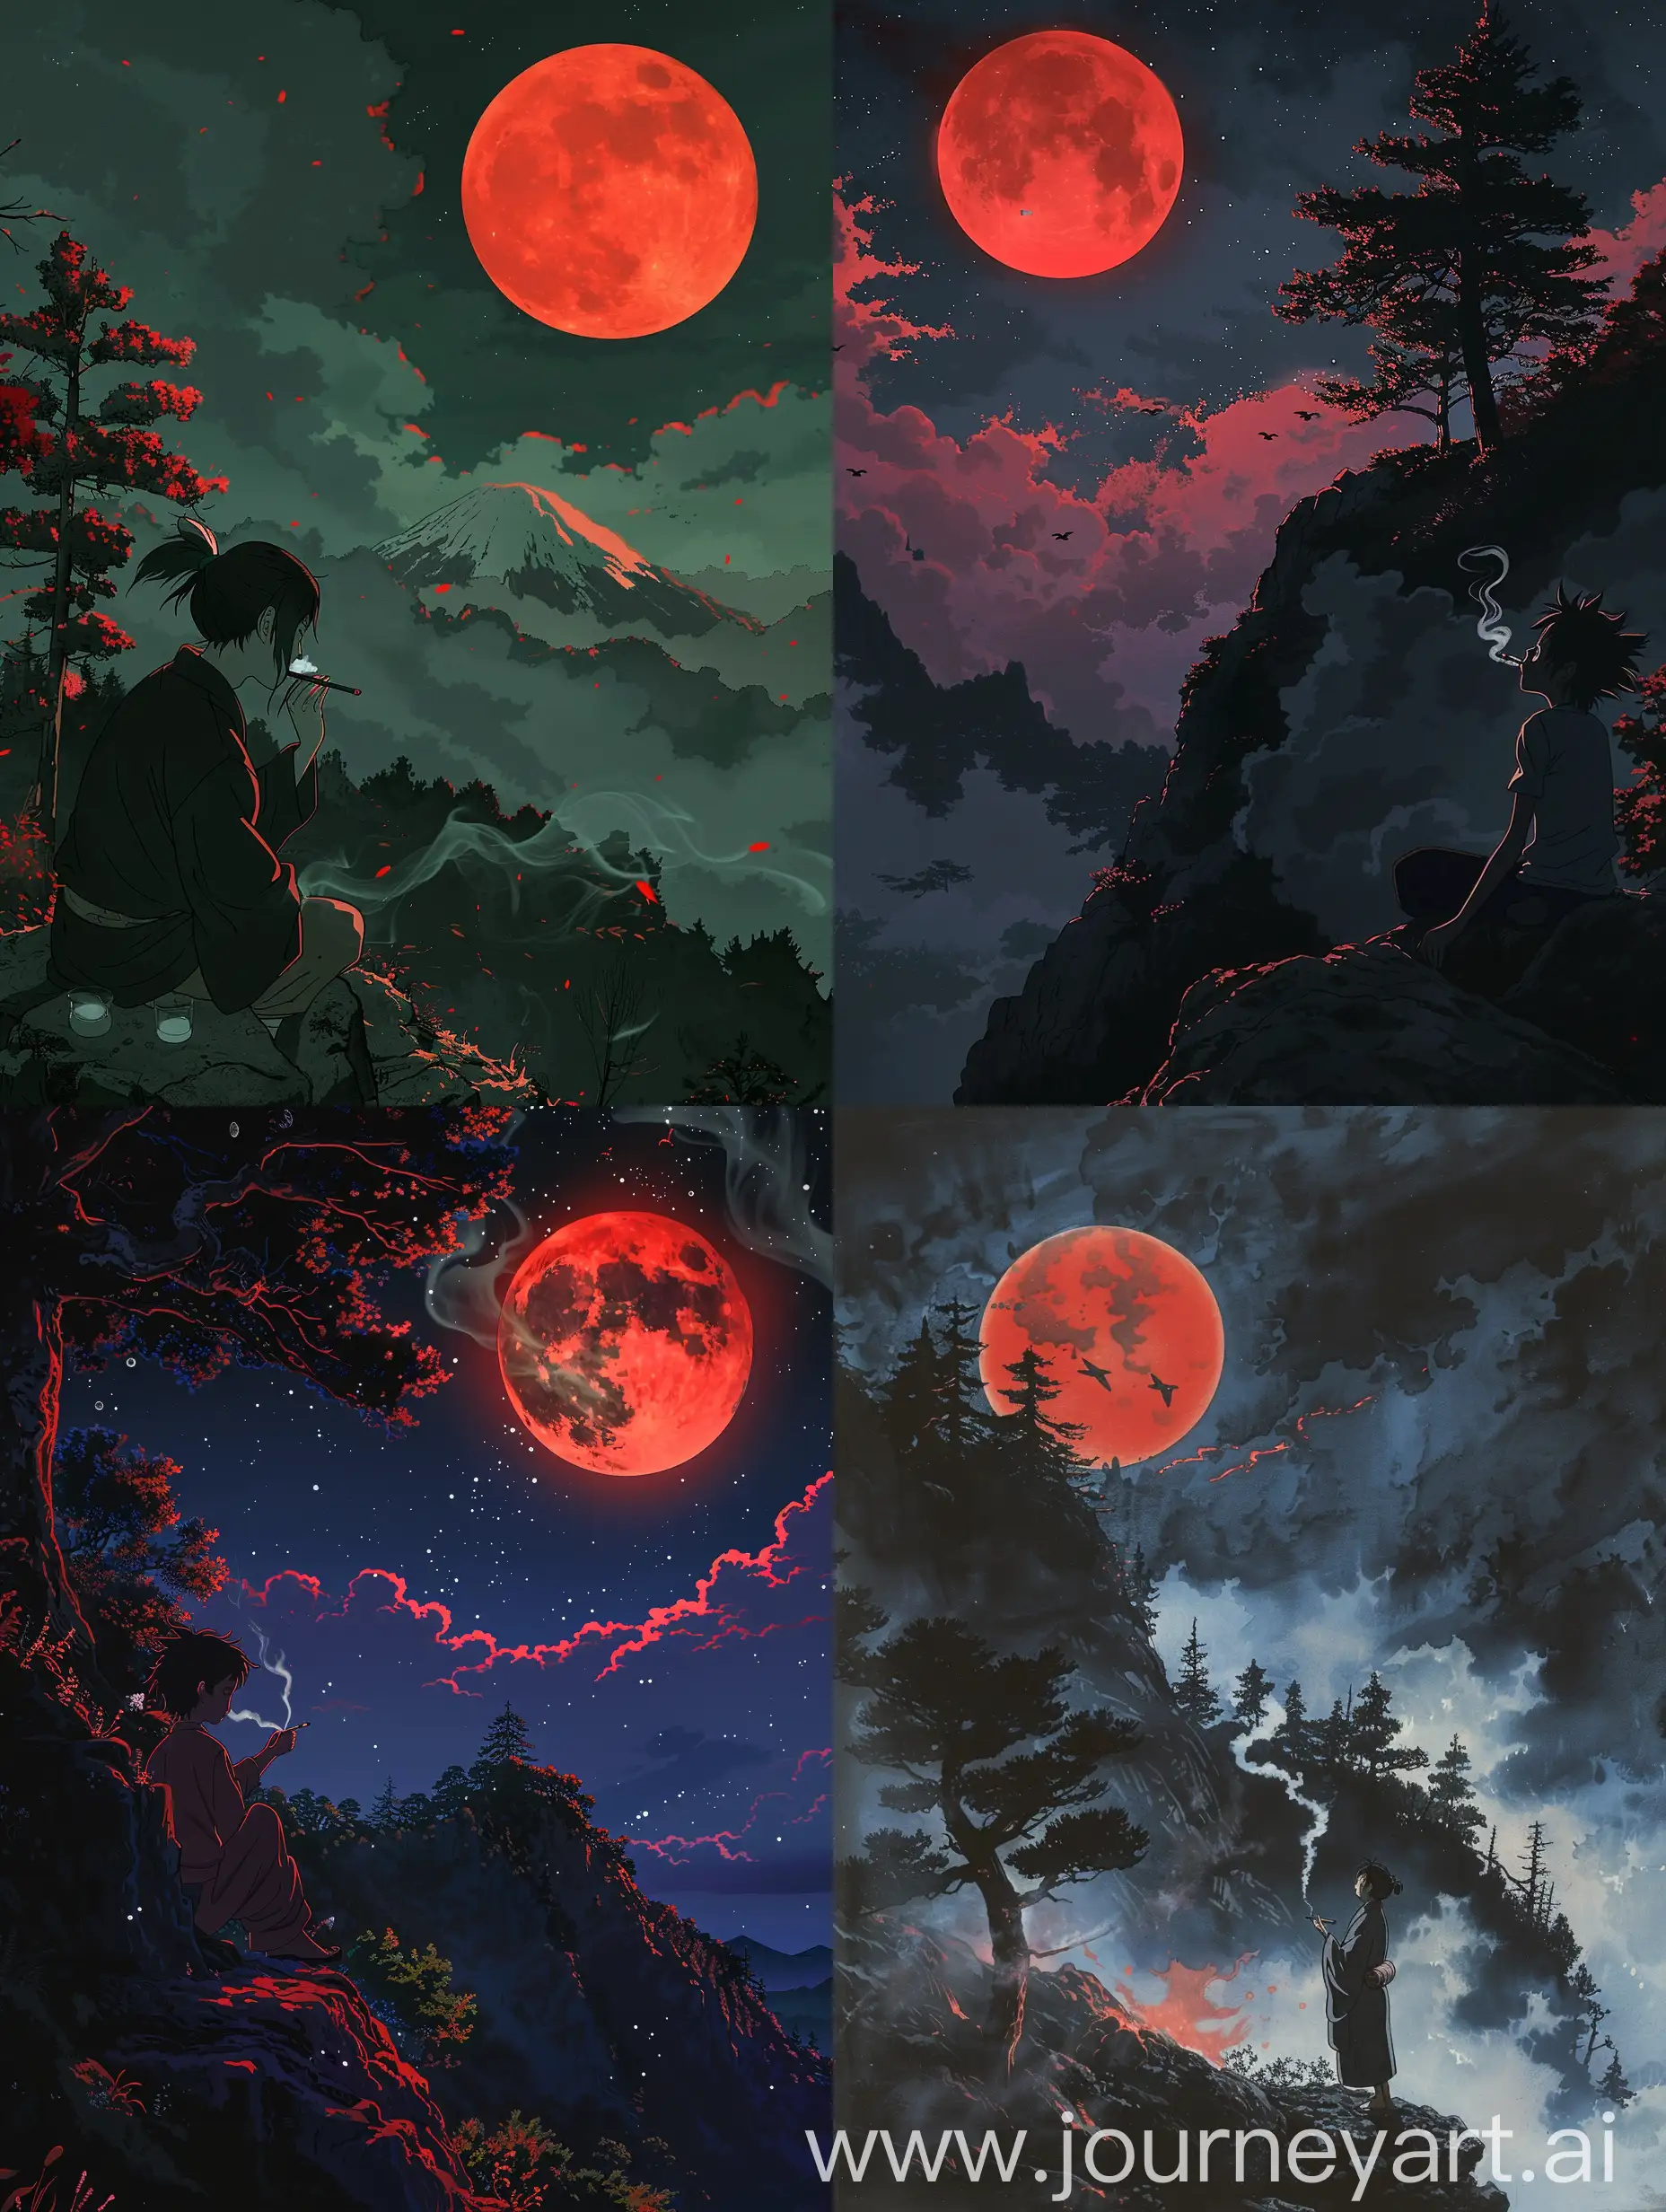 In anime dark night a character smoking on the mountain and tress and red moon studio Ghibli 